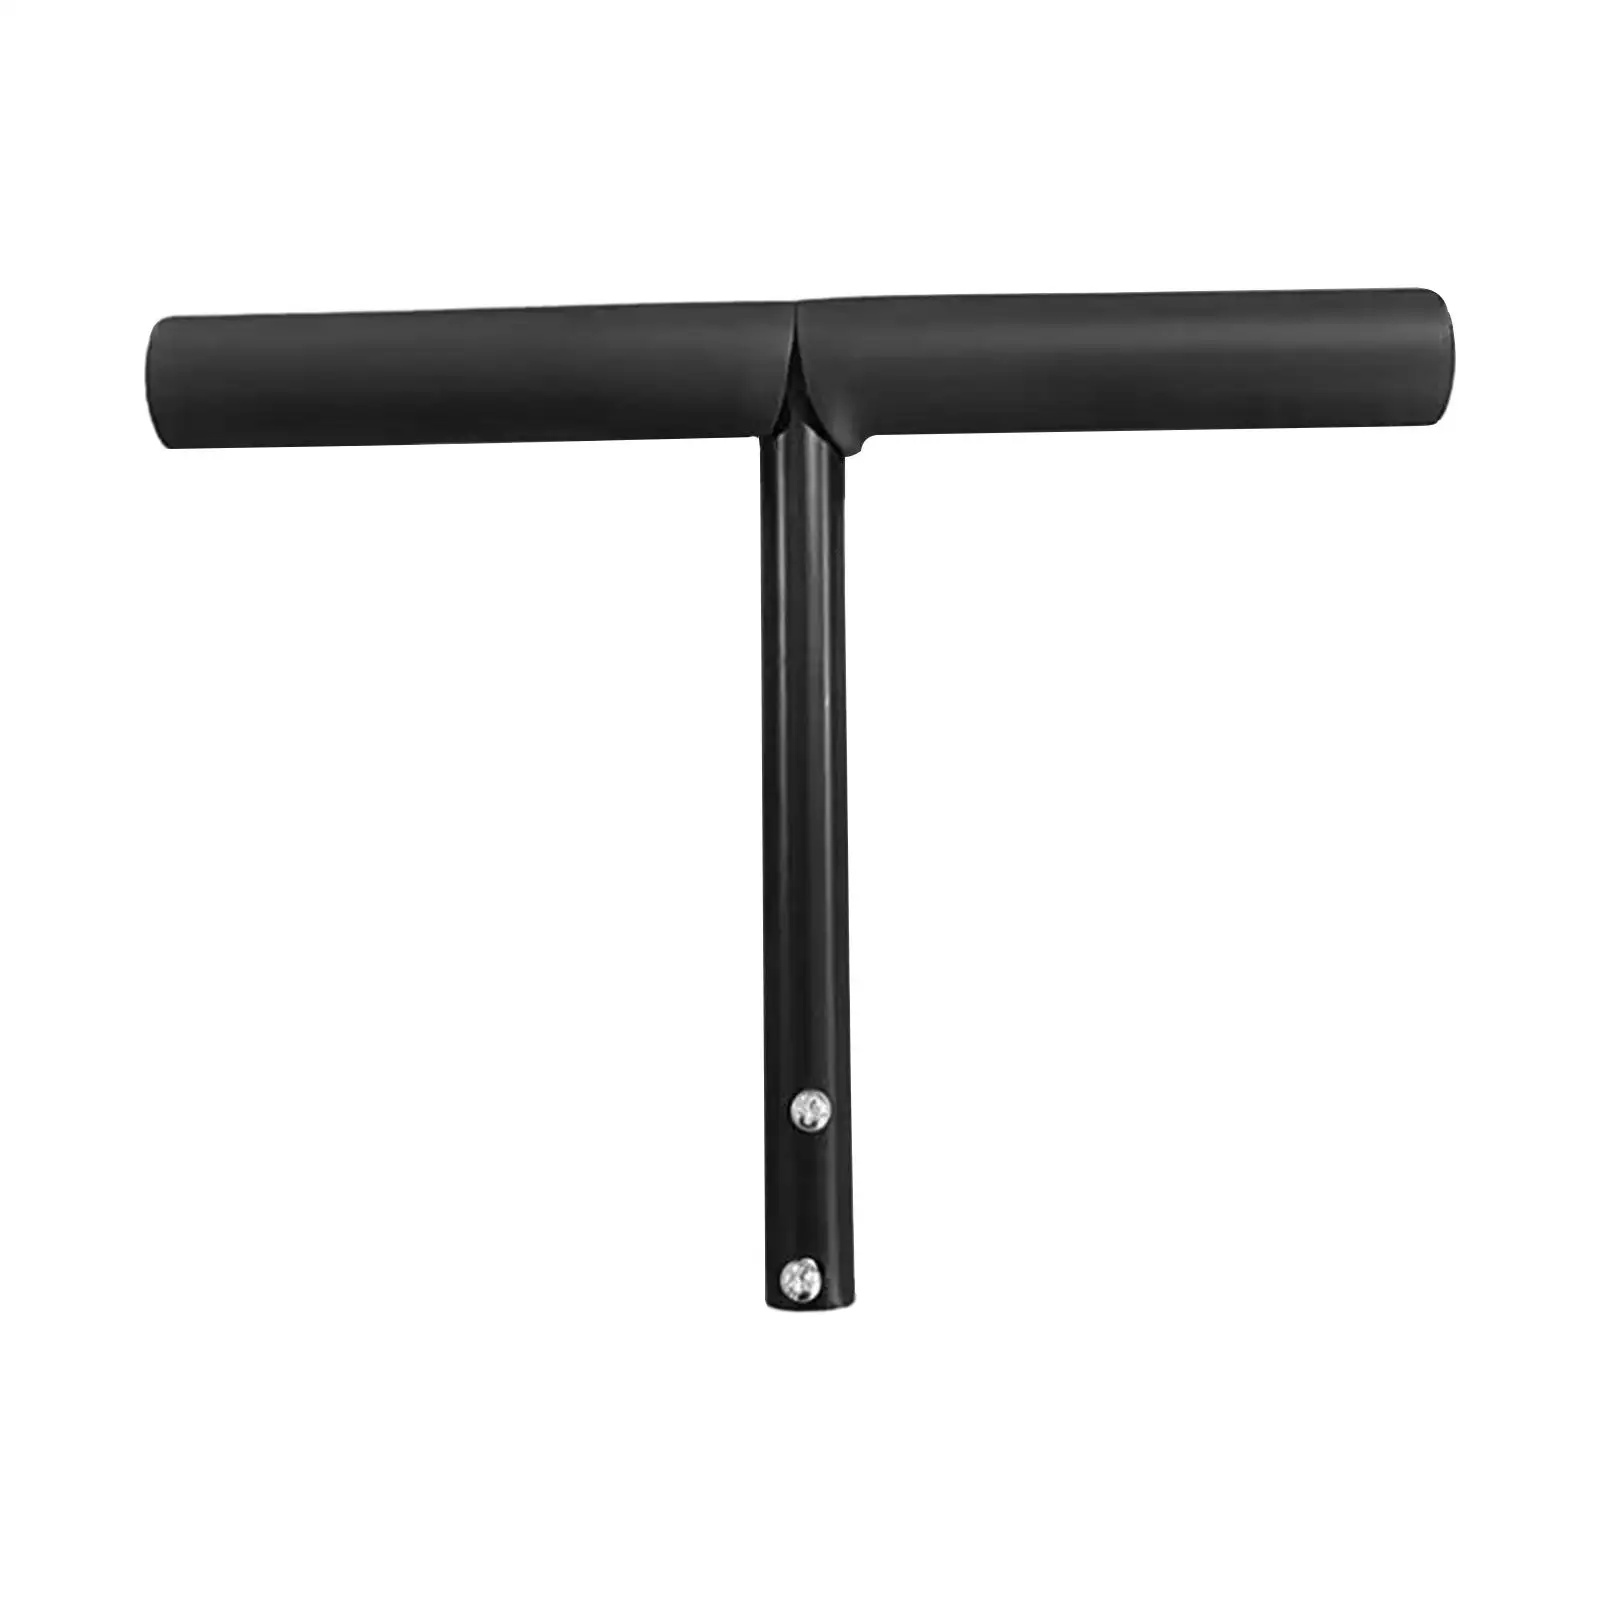 T Shaped Push Handle Bar Sturdy Kids Tricycle Accessories Easy to Install Durable Replacement Parts for Home Travel Outdoor